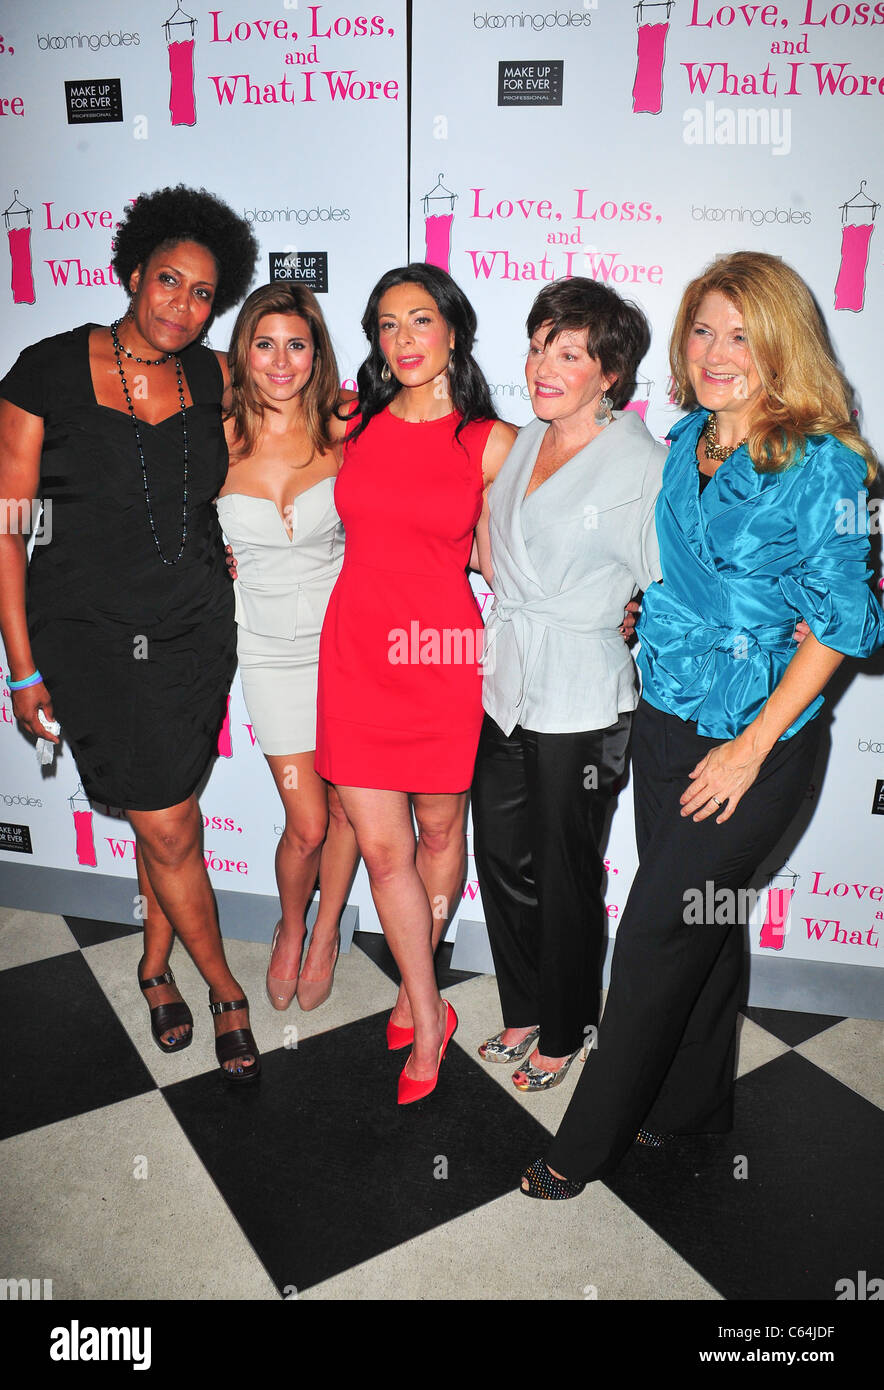 Nancy Giles, Jamie-Lynn Sigler, Stacy London, Helen Carey, Victoria Clark at arrivals for LOVE, LOSS, AND WHAT I WORE Cast Party, 44 1/2 Restaurant, New York, NY September 2, 2010. Photo By: Gregorio T. Binuya/Everett Collection Stock Photo